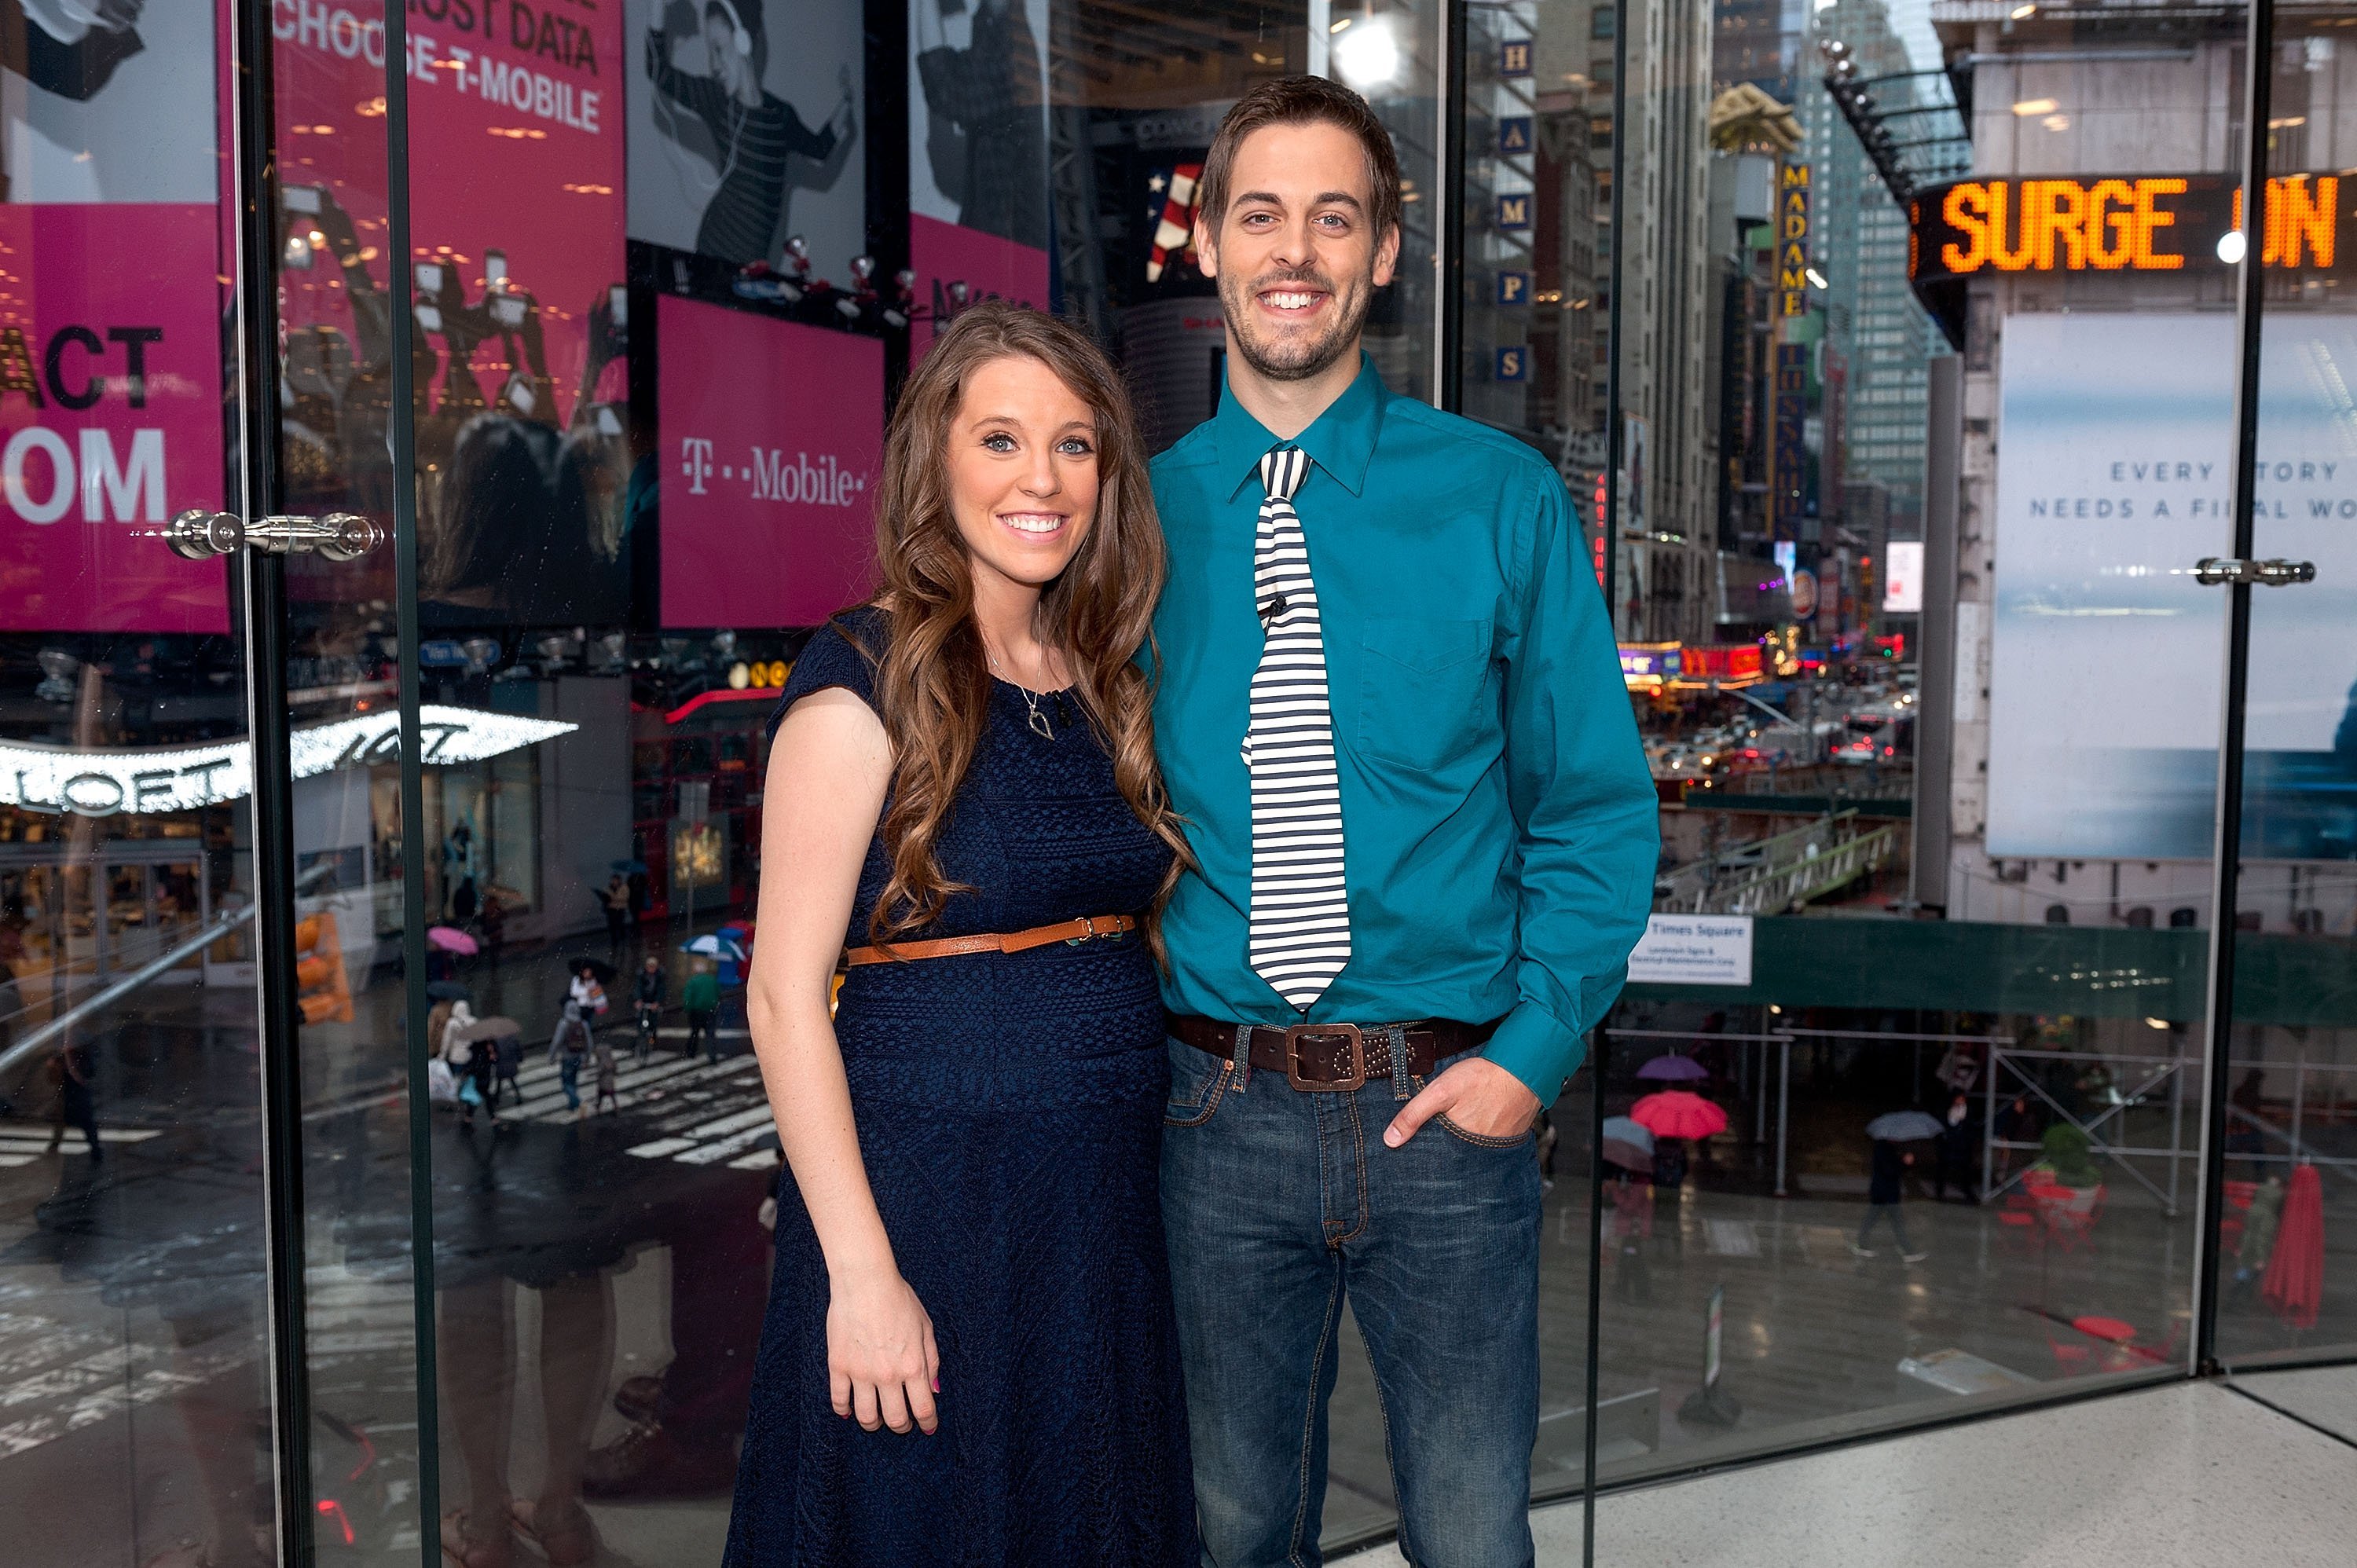 Jill Duggar Dillar and Derick Dillar visit "Extra" in Times Square, New York City on October 23, 2014 | Photo: Getty Images